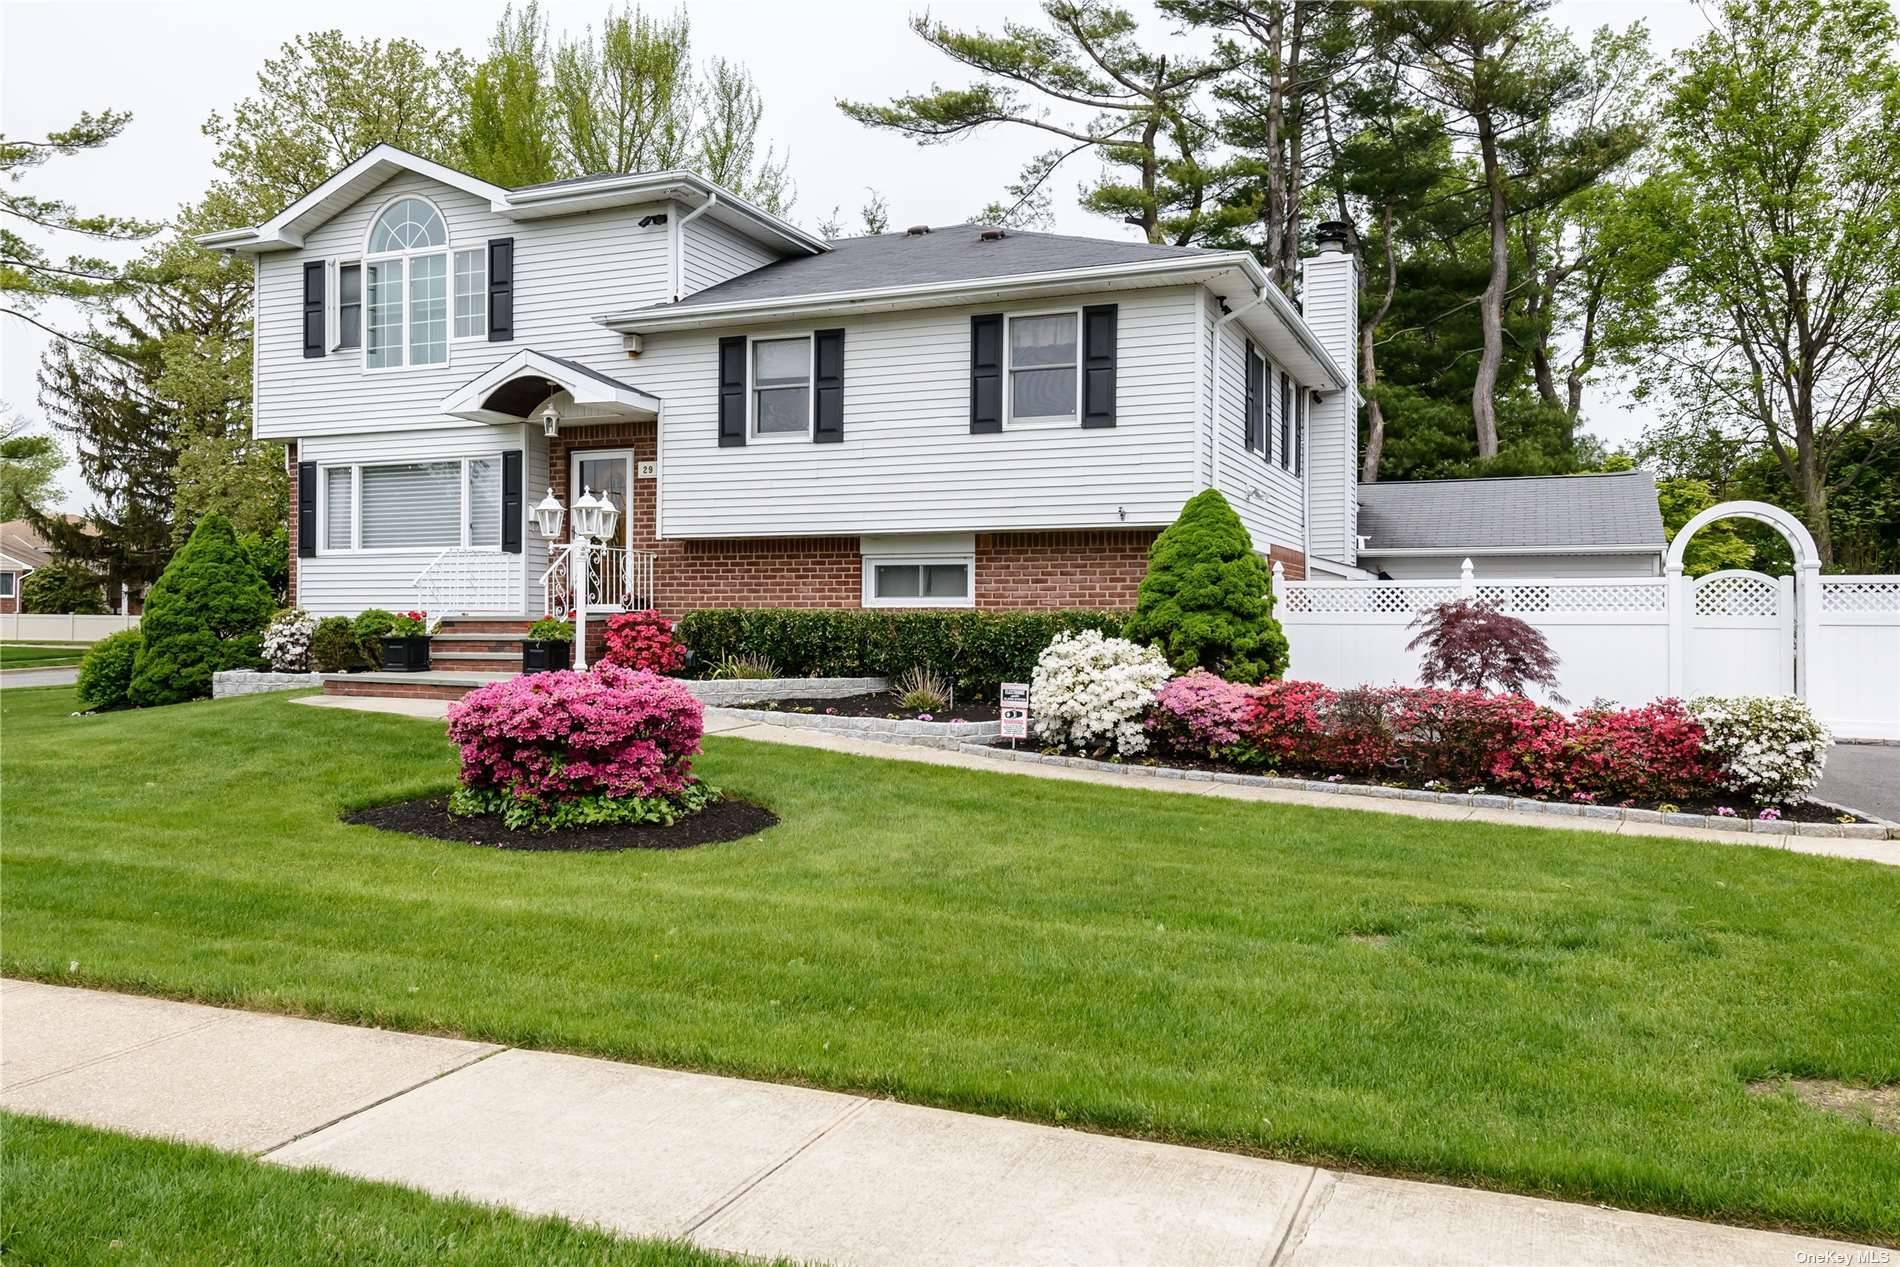 Beautifully Renovated Home In The Sought After North Syosset Area Of Flower Hill With Easy Access To Town, Shops and LIRR.